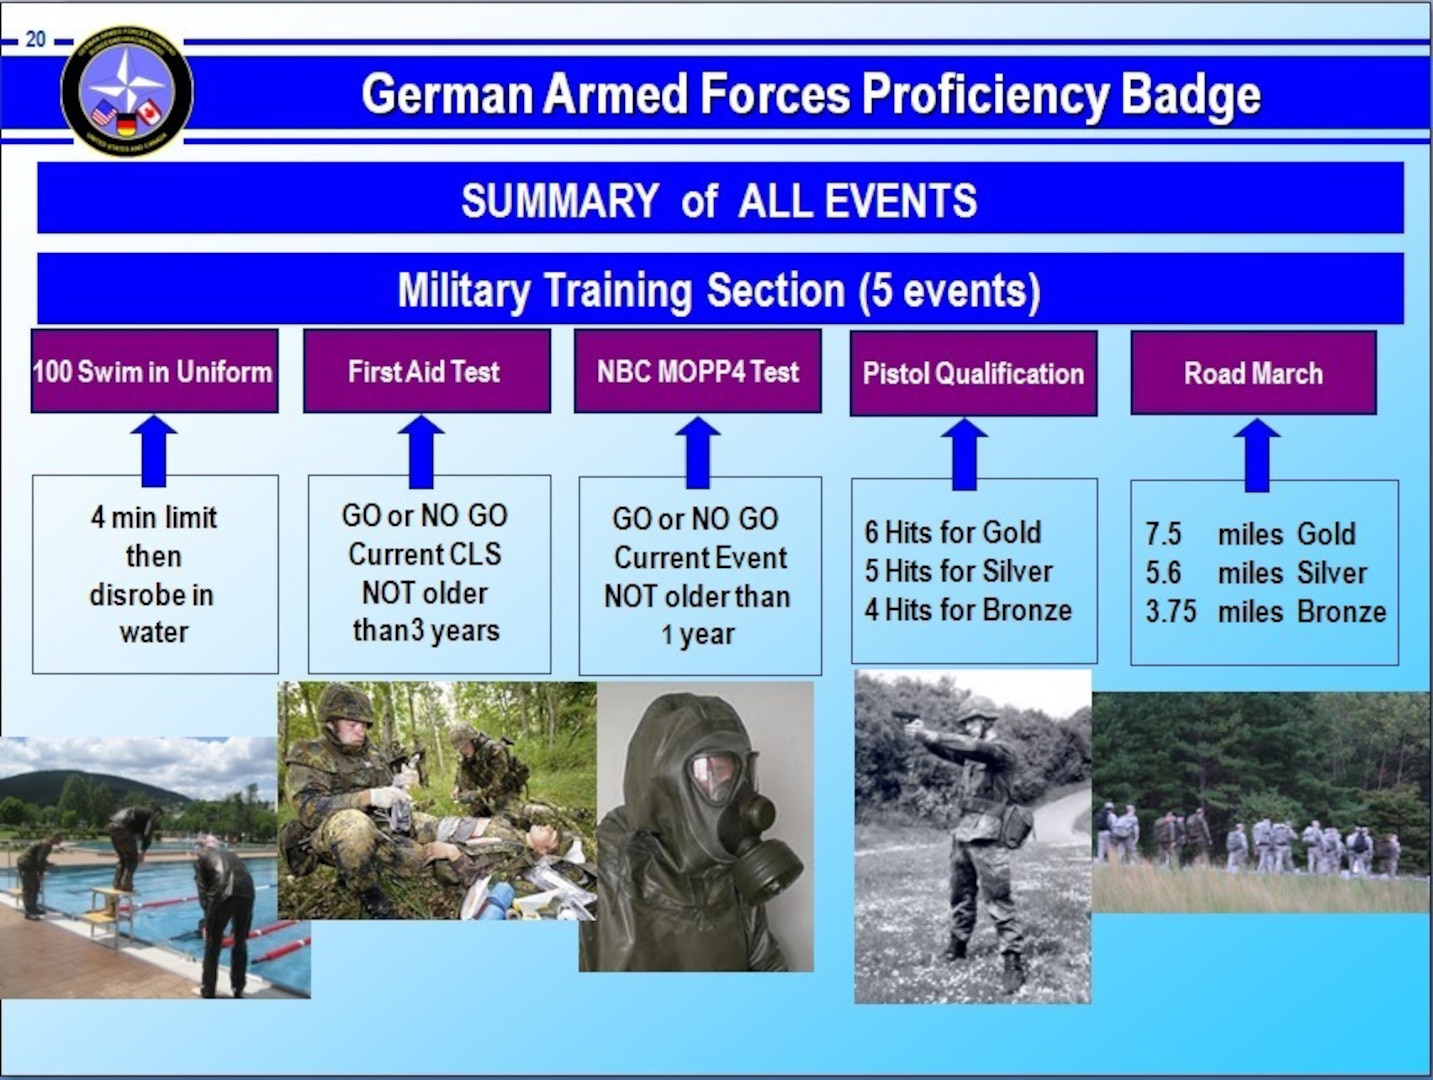 The German Military Proficiency Badge tests a Soldier's ability to swim, march, qualify with a pistol, operate in a chemically contaminated environment, and handle basic first aid tasks.